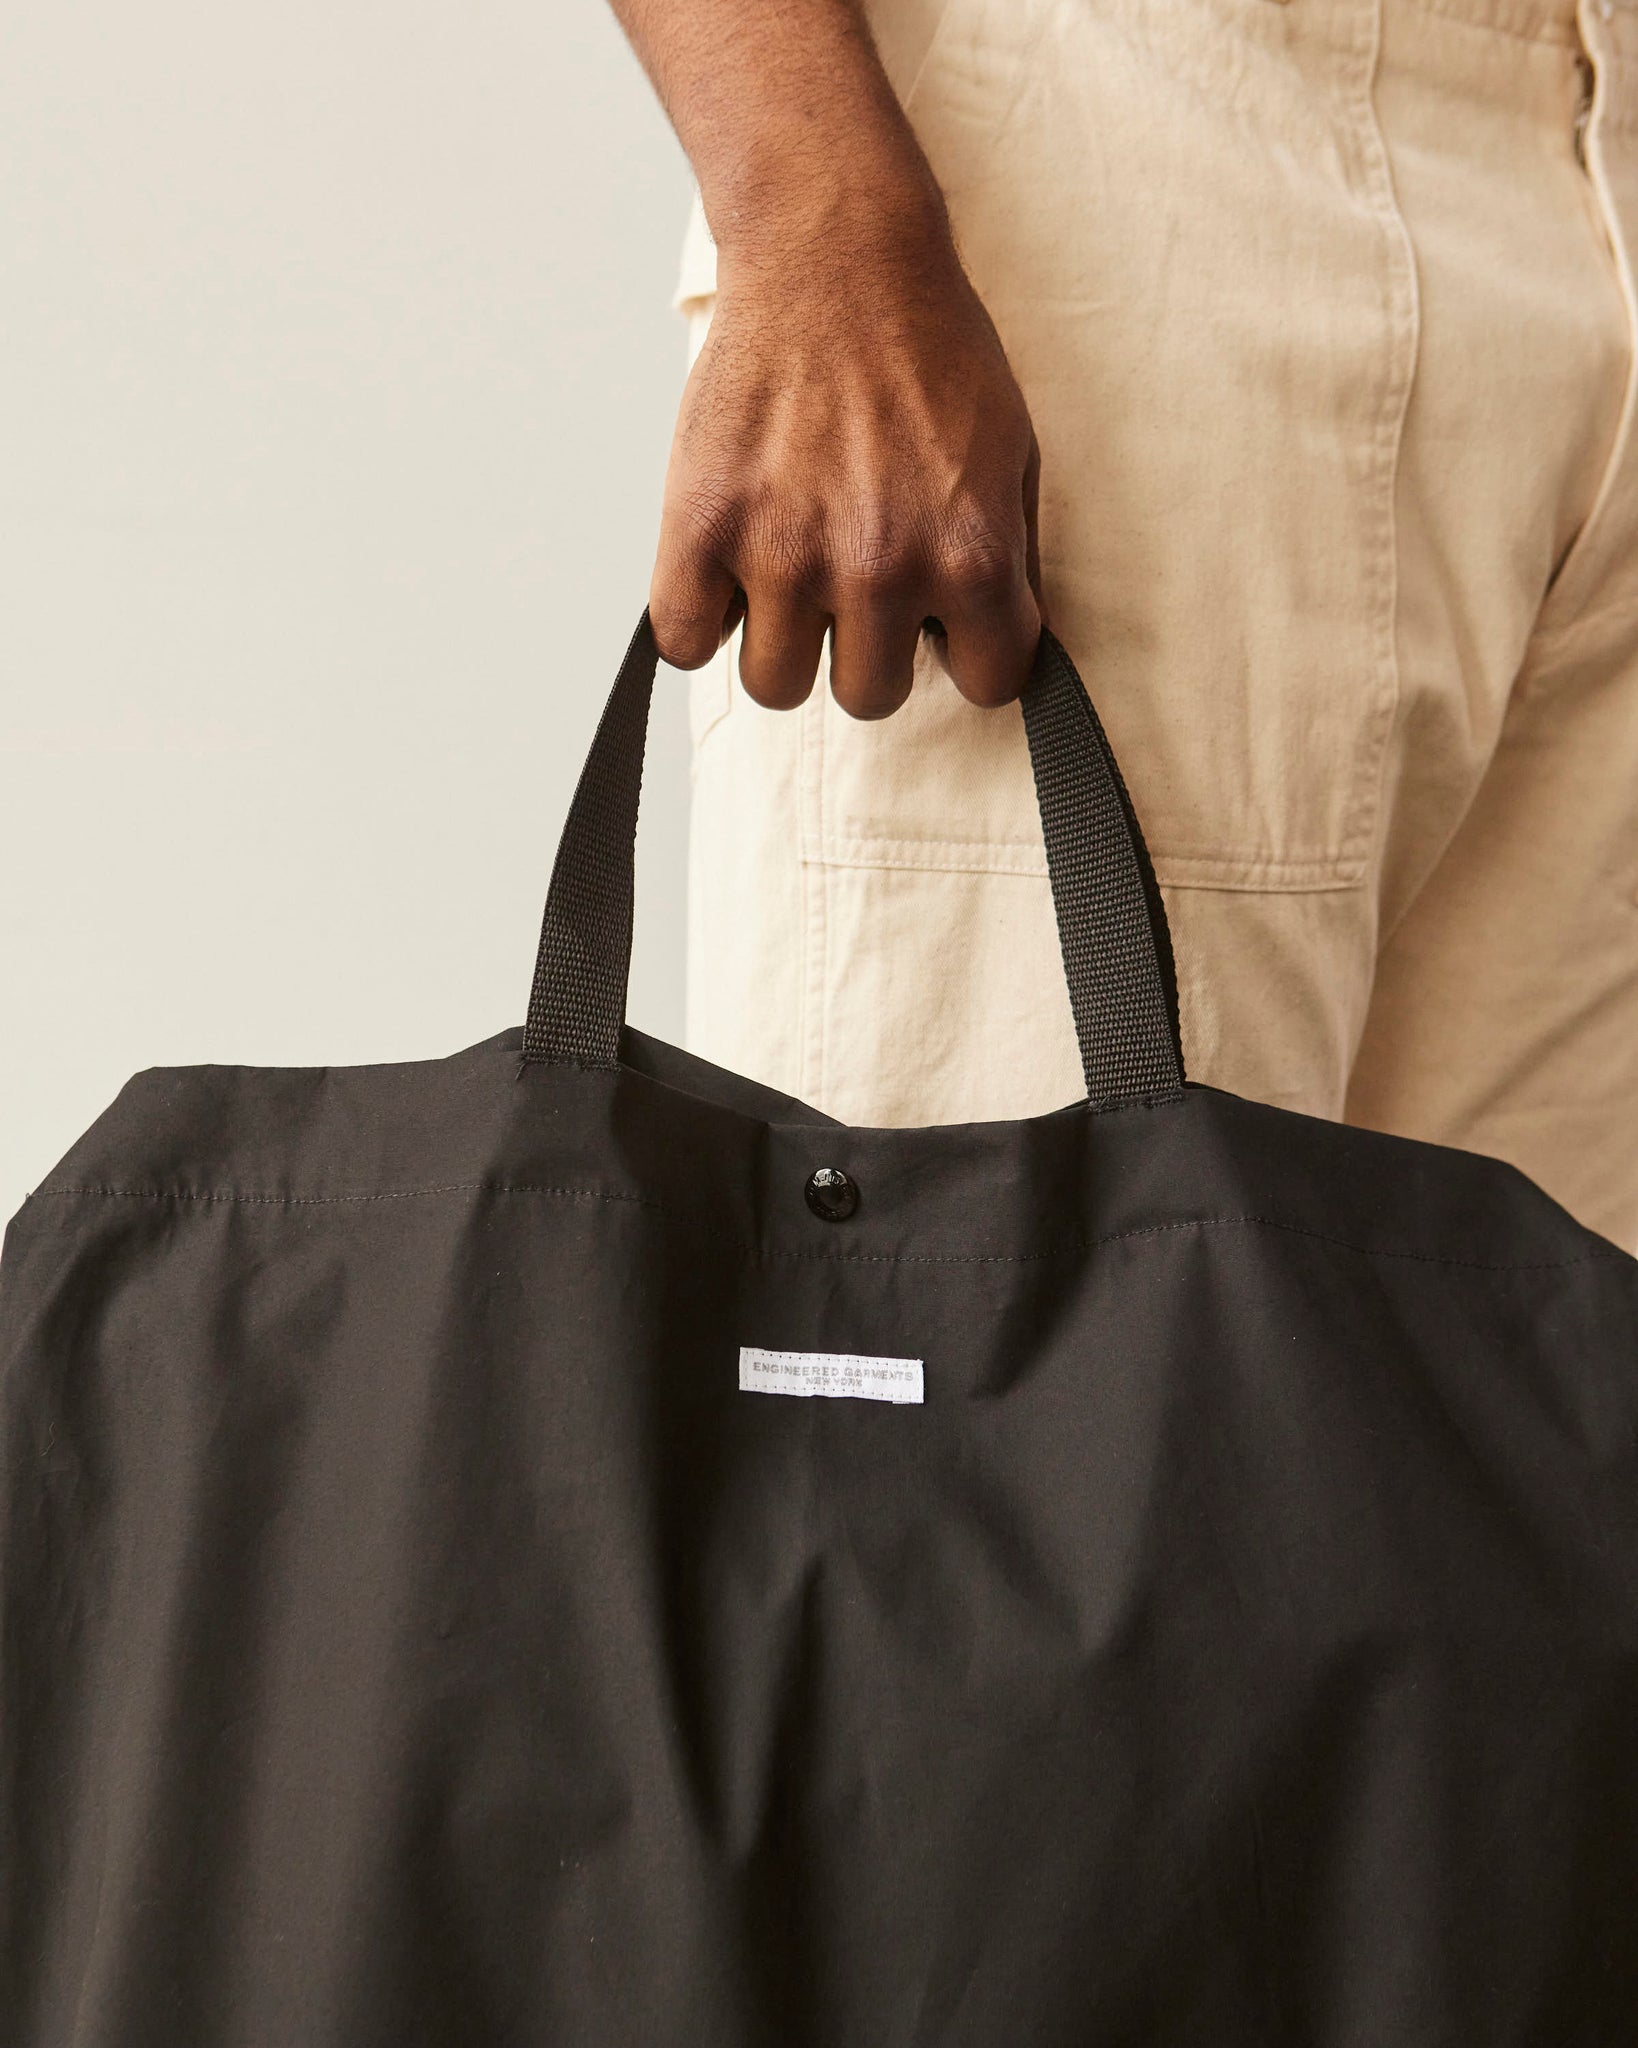 Engineered Garments Duracloth Carry All Tote, Black